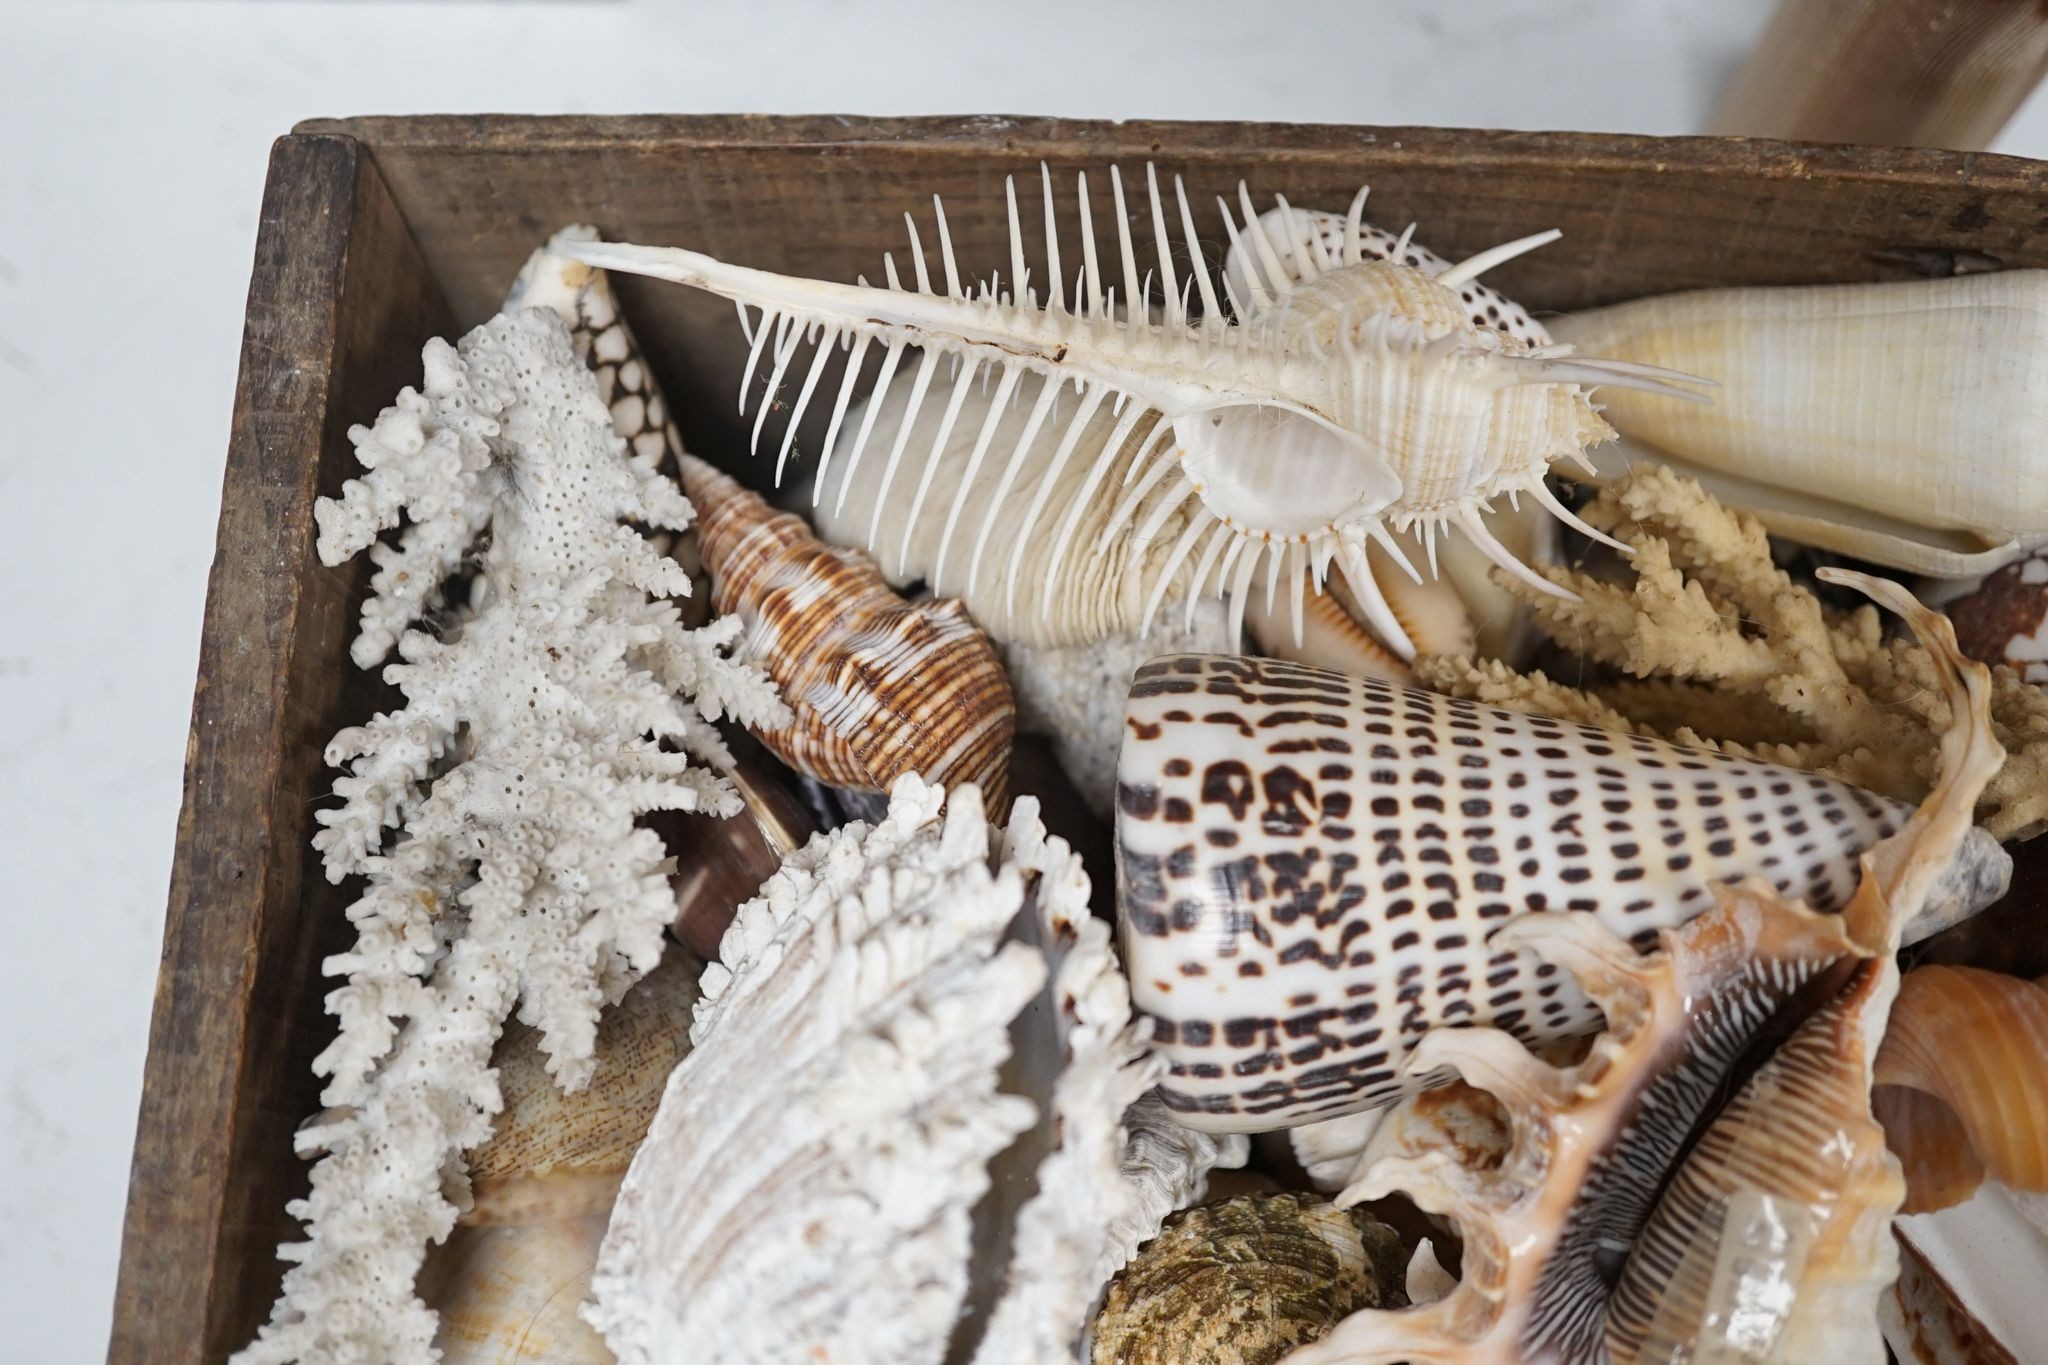 A collection of shells etc. in a box